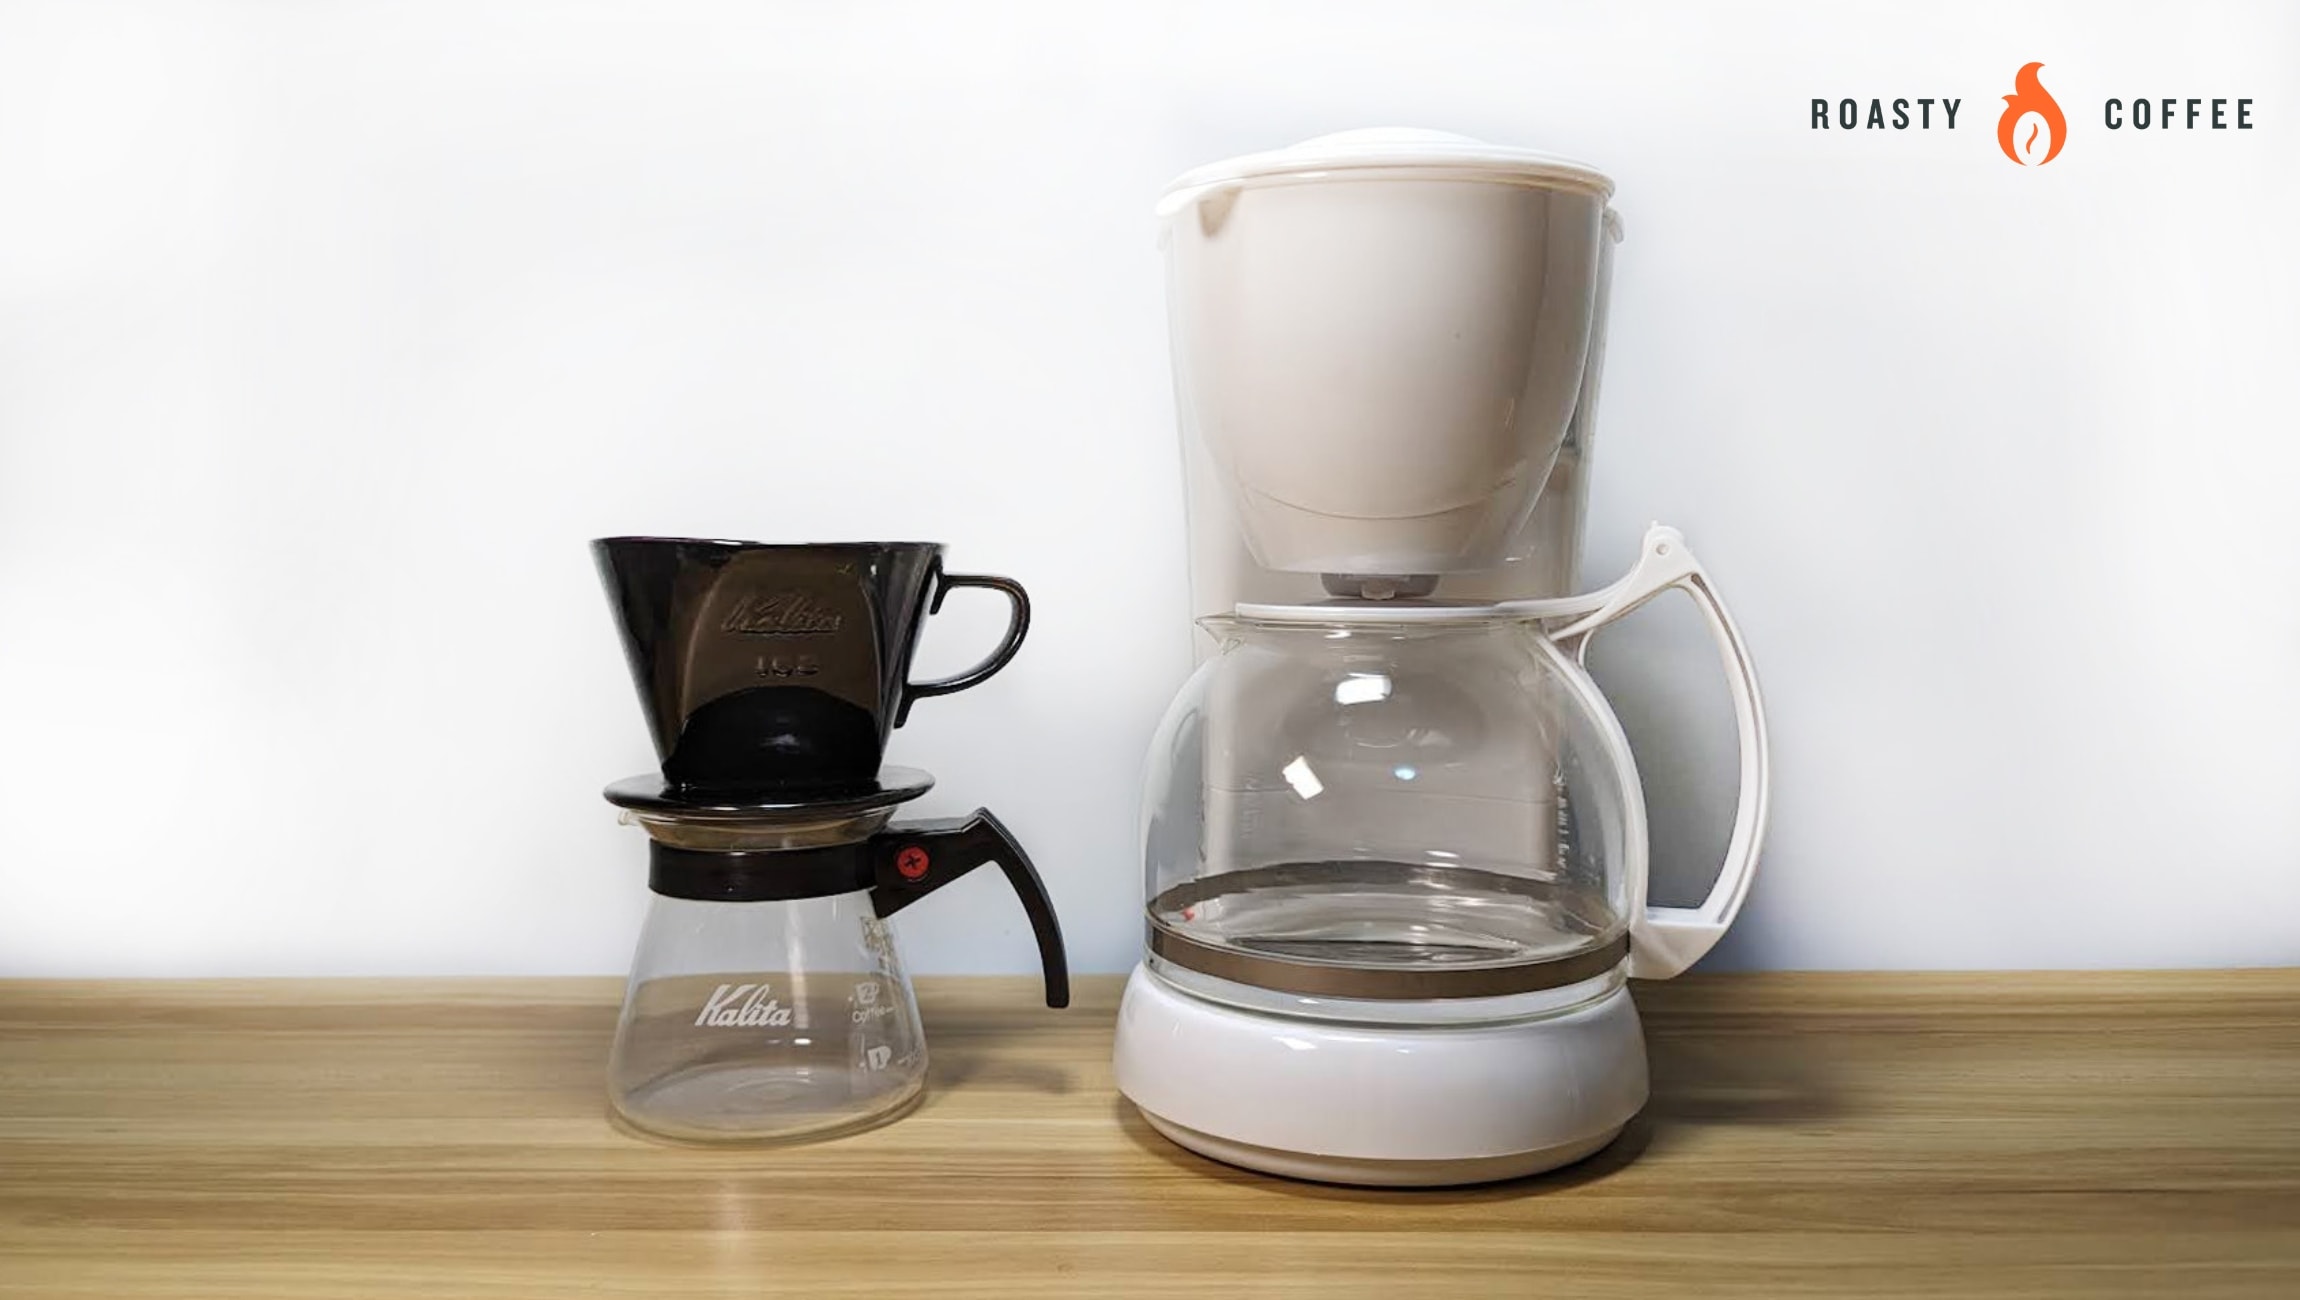 Pour Over vs. Drip Coffee: Which Brewing Method Is Better?